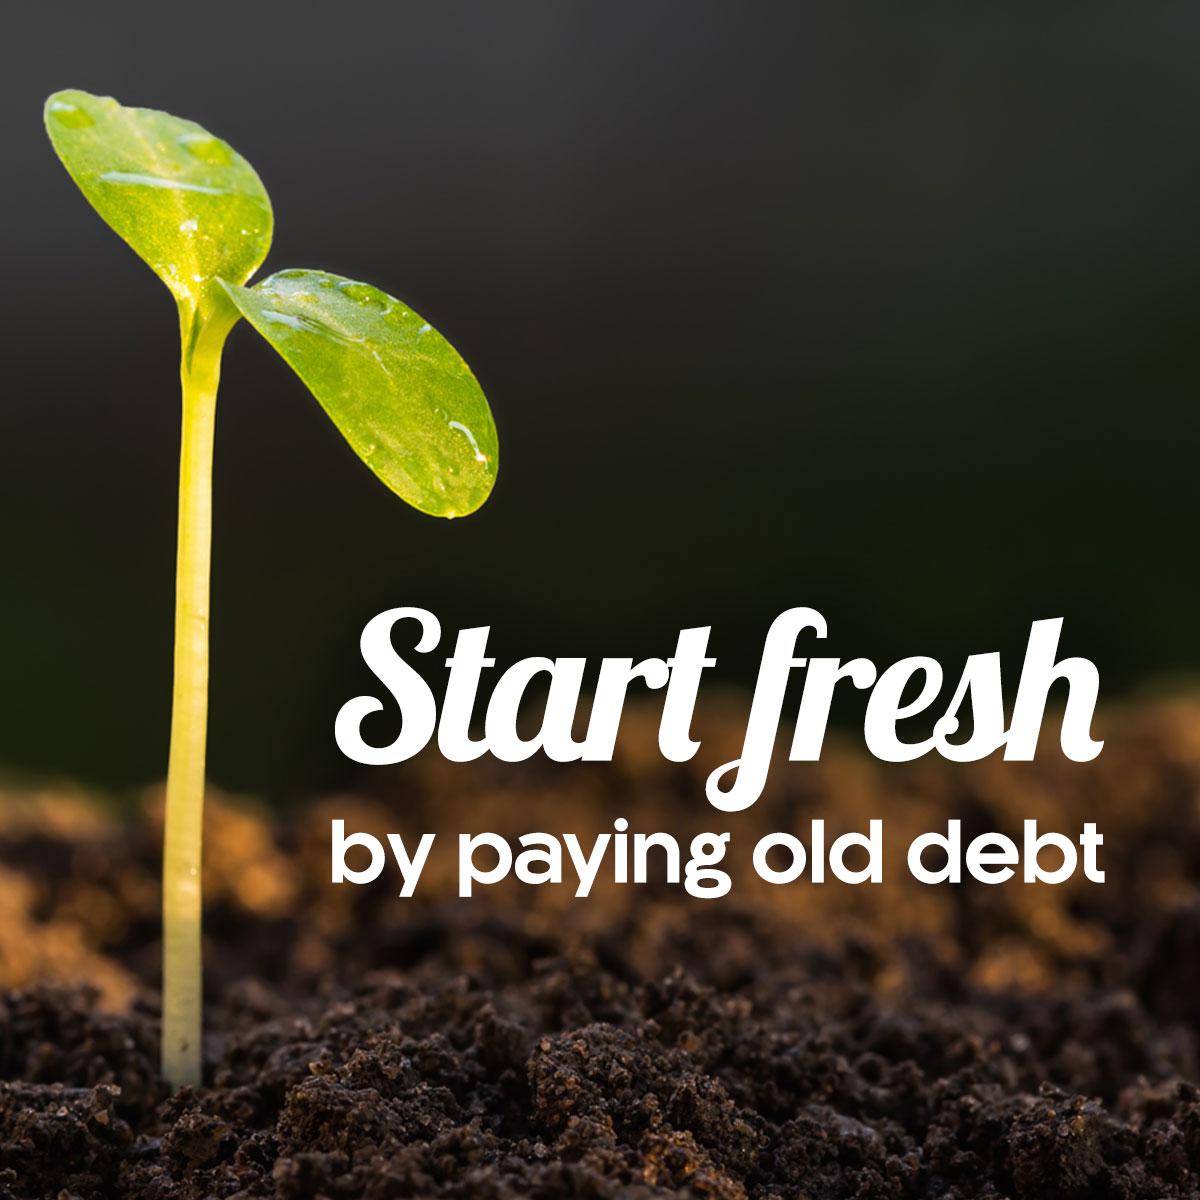 Get a Fresh Start by Paying Old Debt